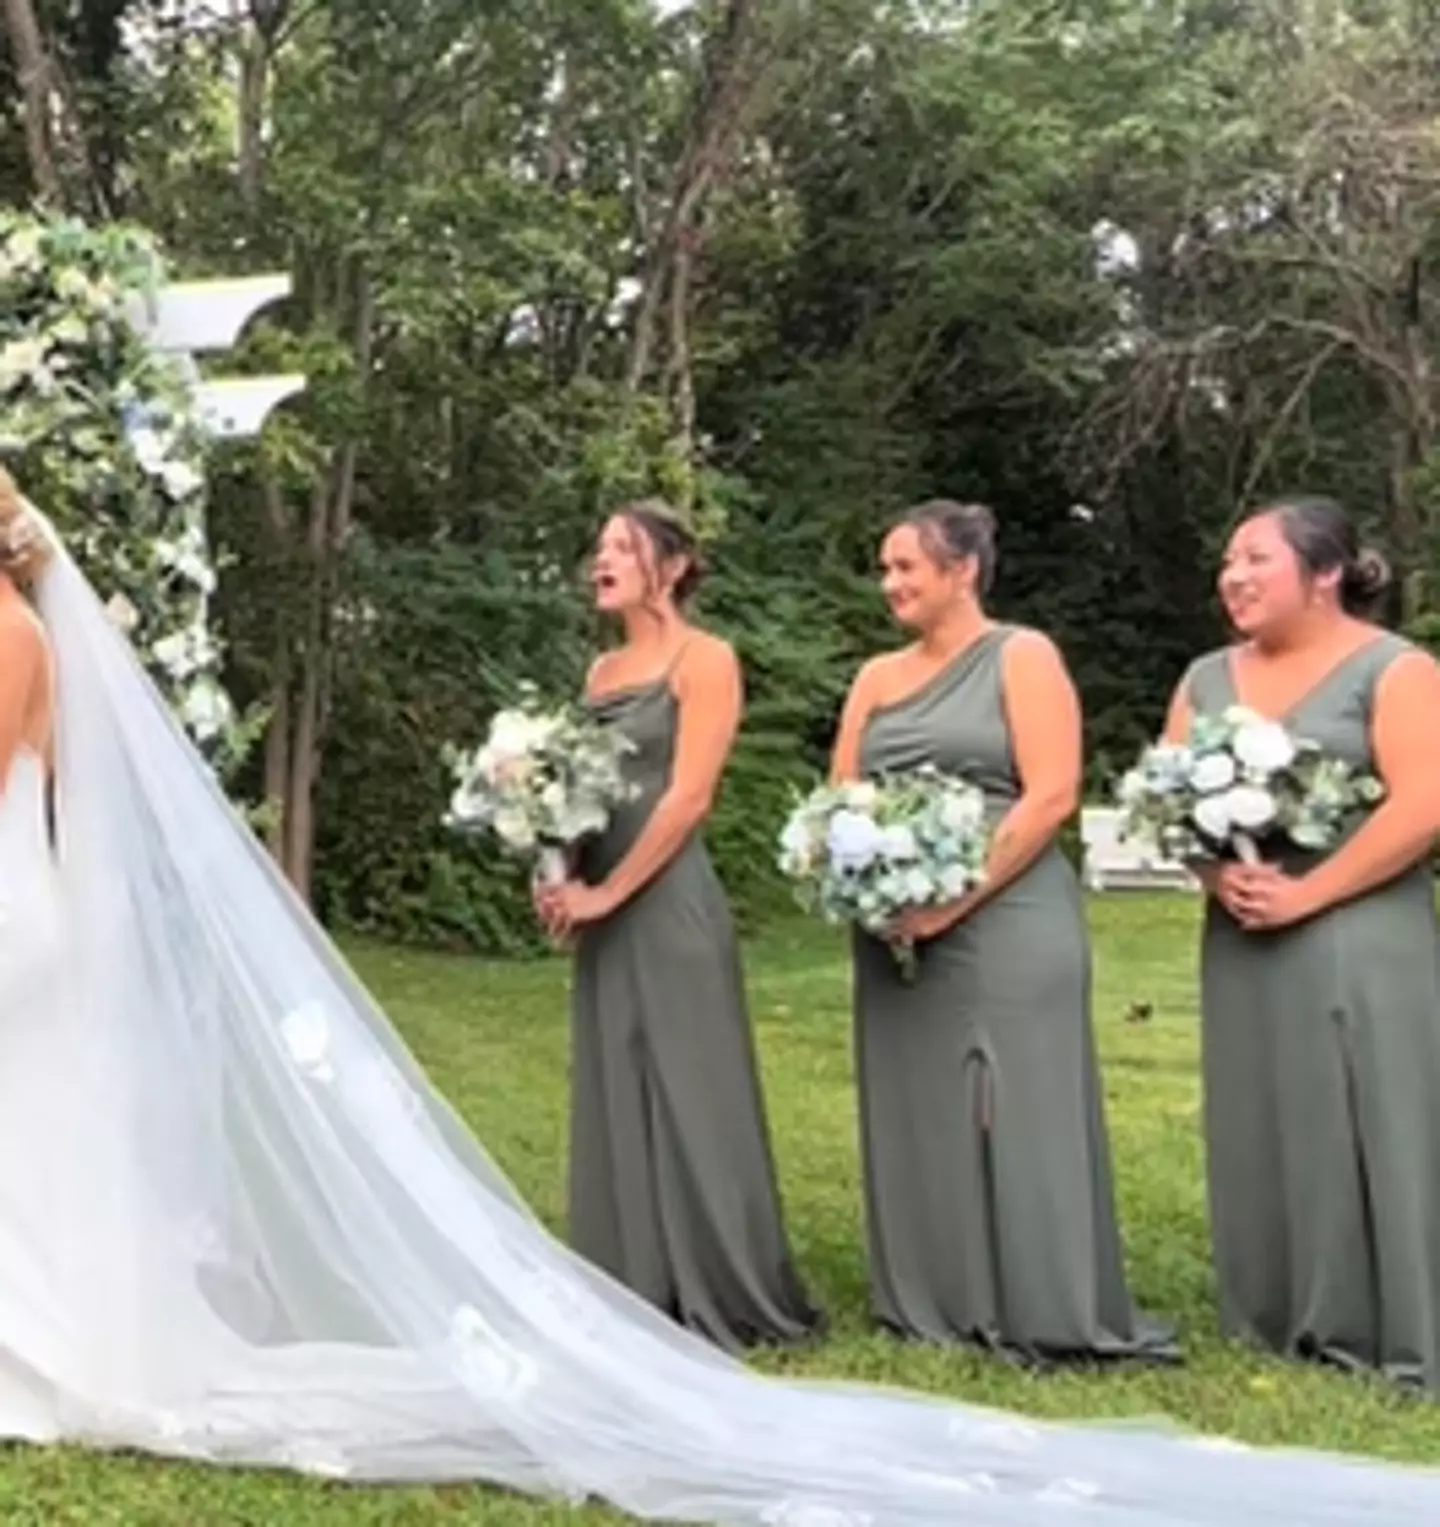 The moment a bridesmaid saw the kitten.